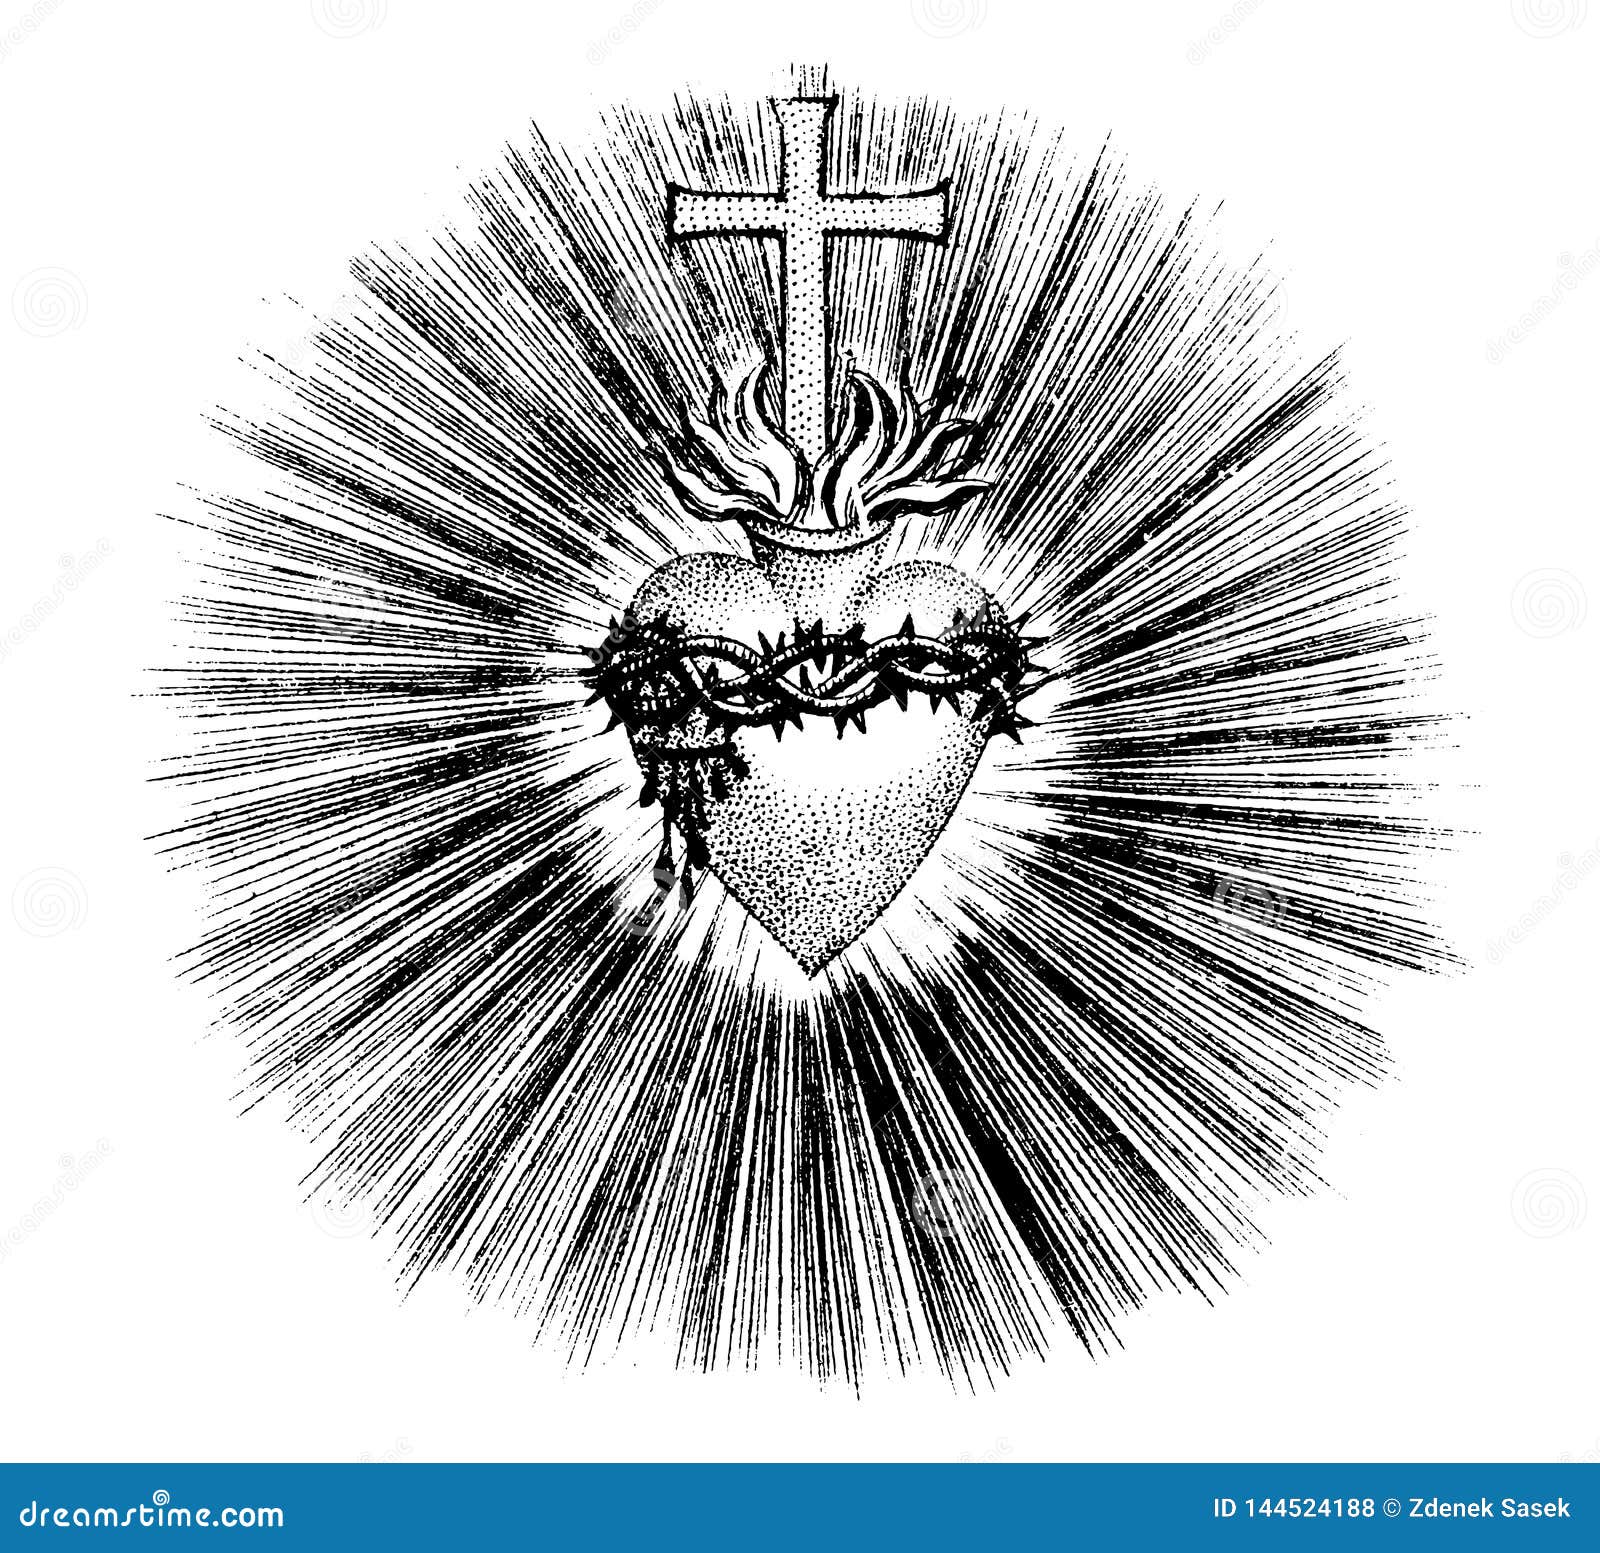 vintage  drawing or engraving of grunge antique  of christian heart with cross, flames and crown of